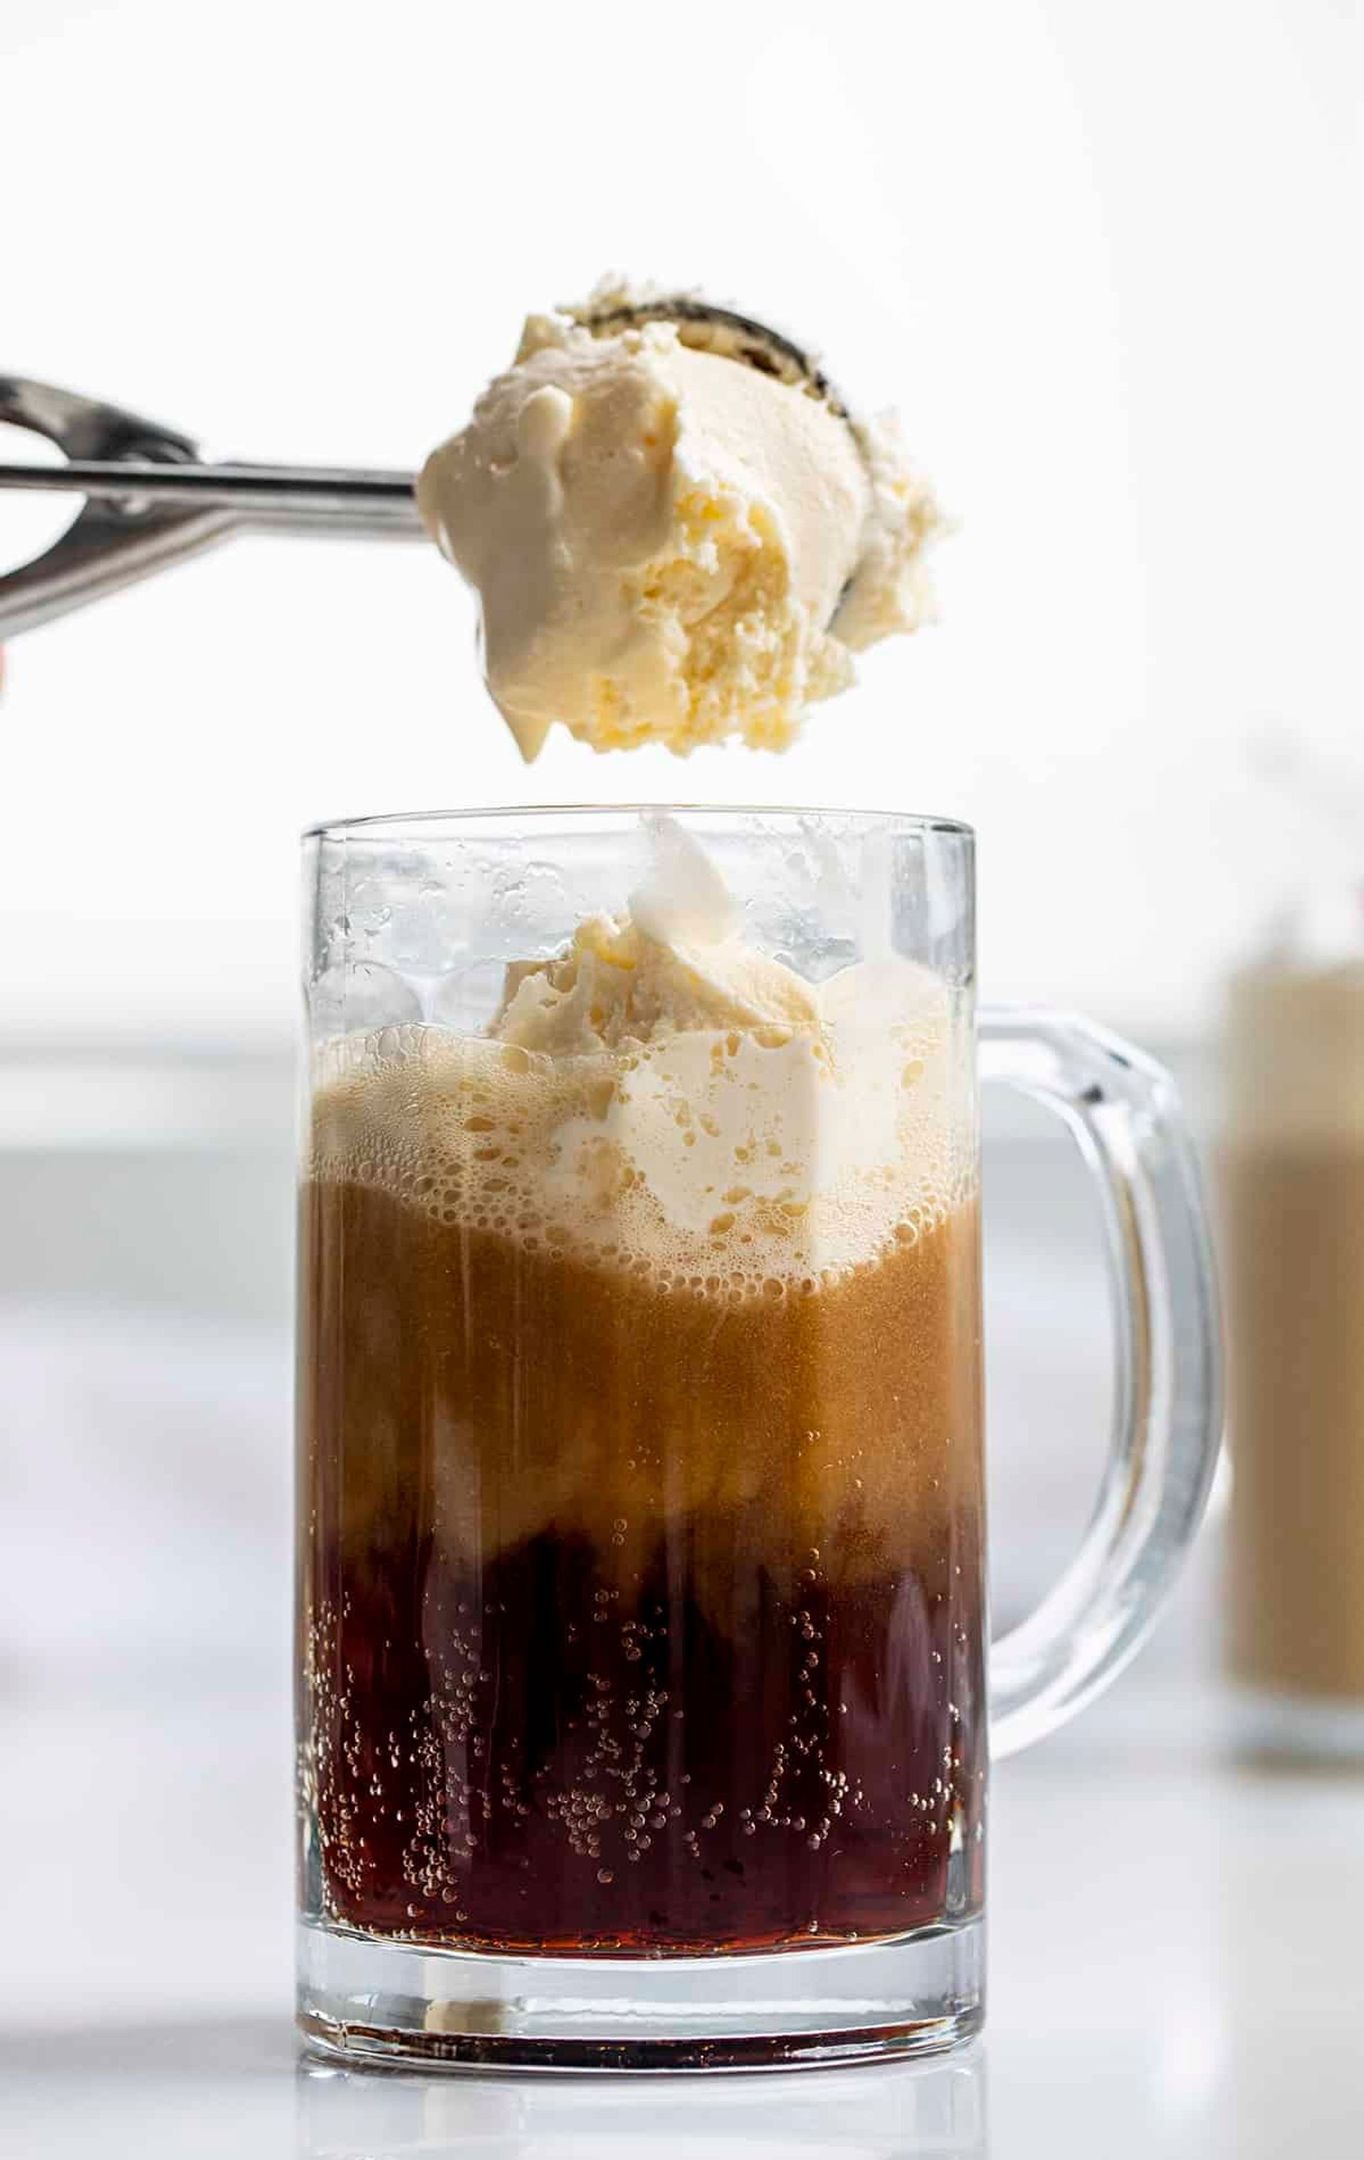 Build Your Own Soda Float!